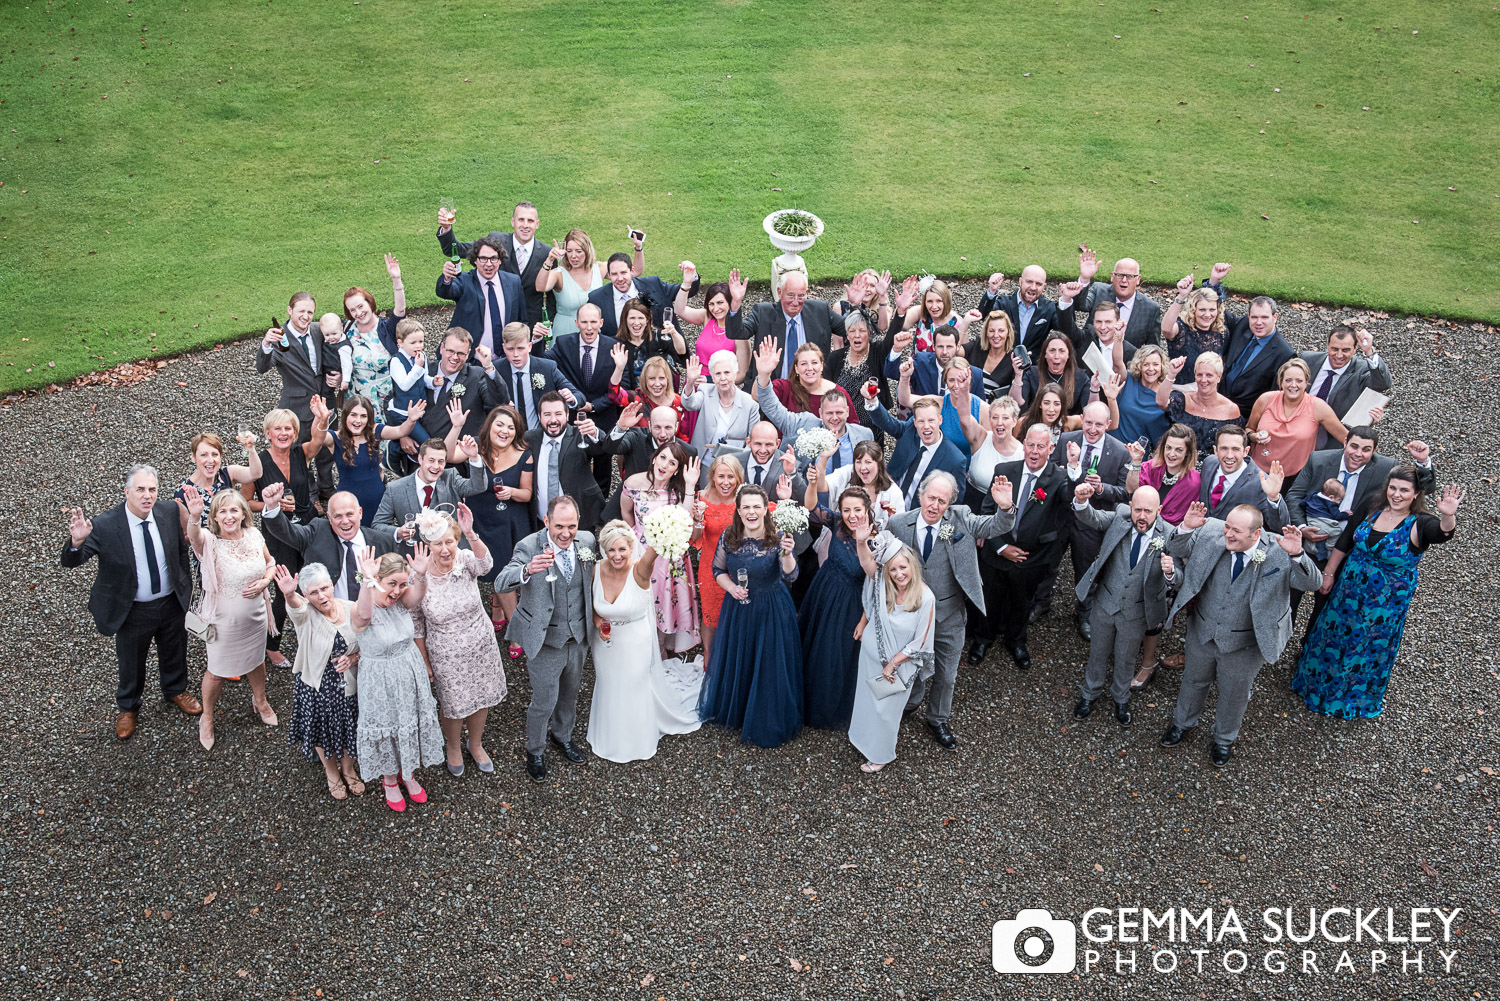 Group photo from above of all the wedding guests from the window of Belmount Hall